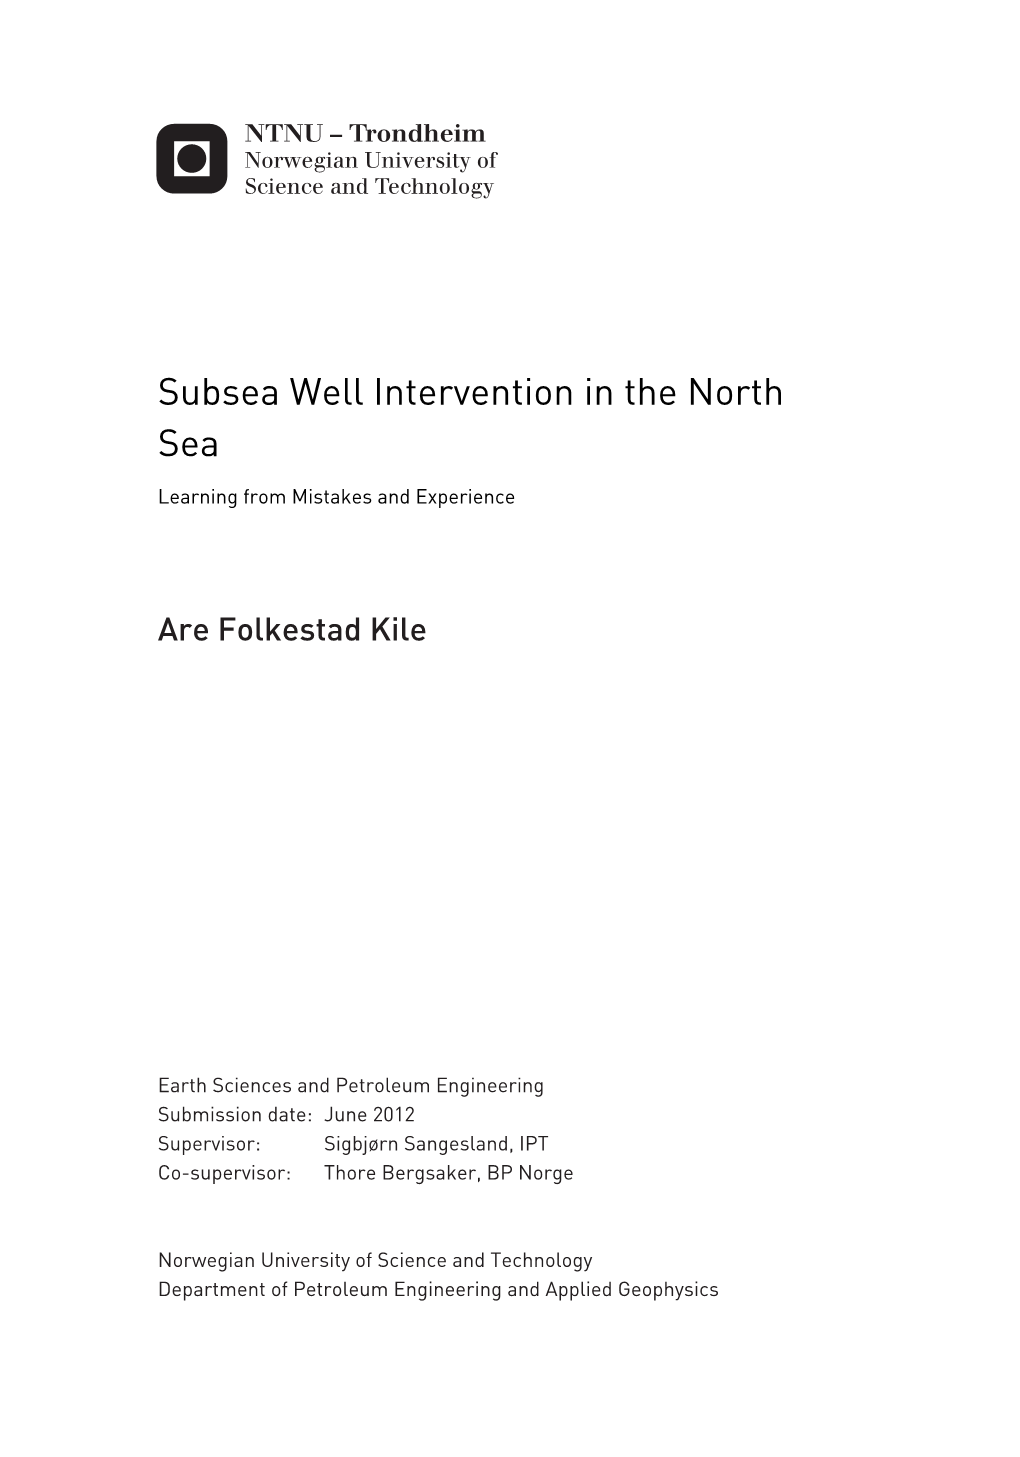 Subsea Well Intervention in the North Sea